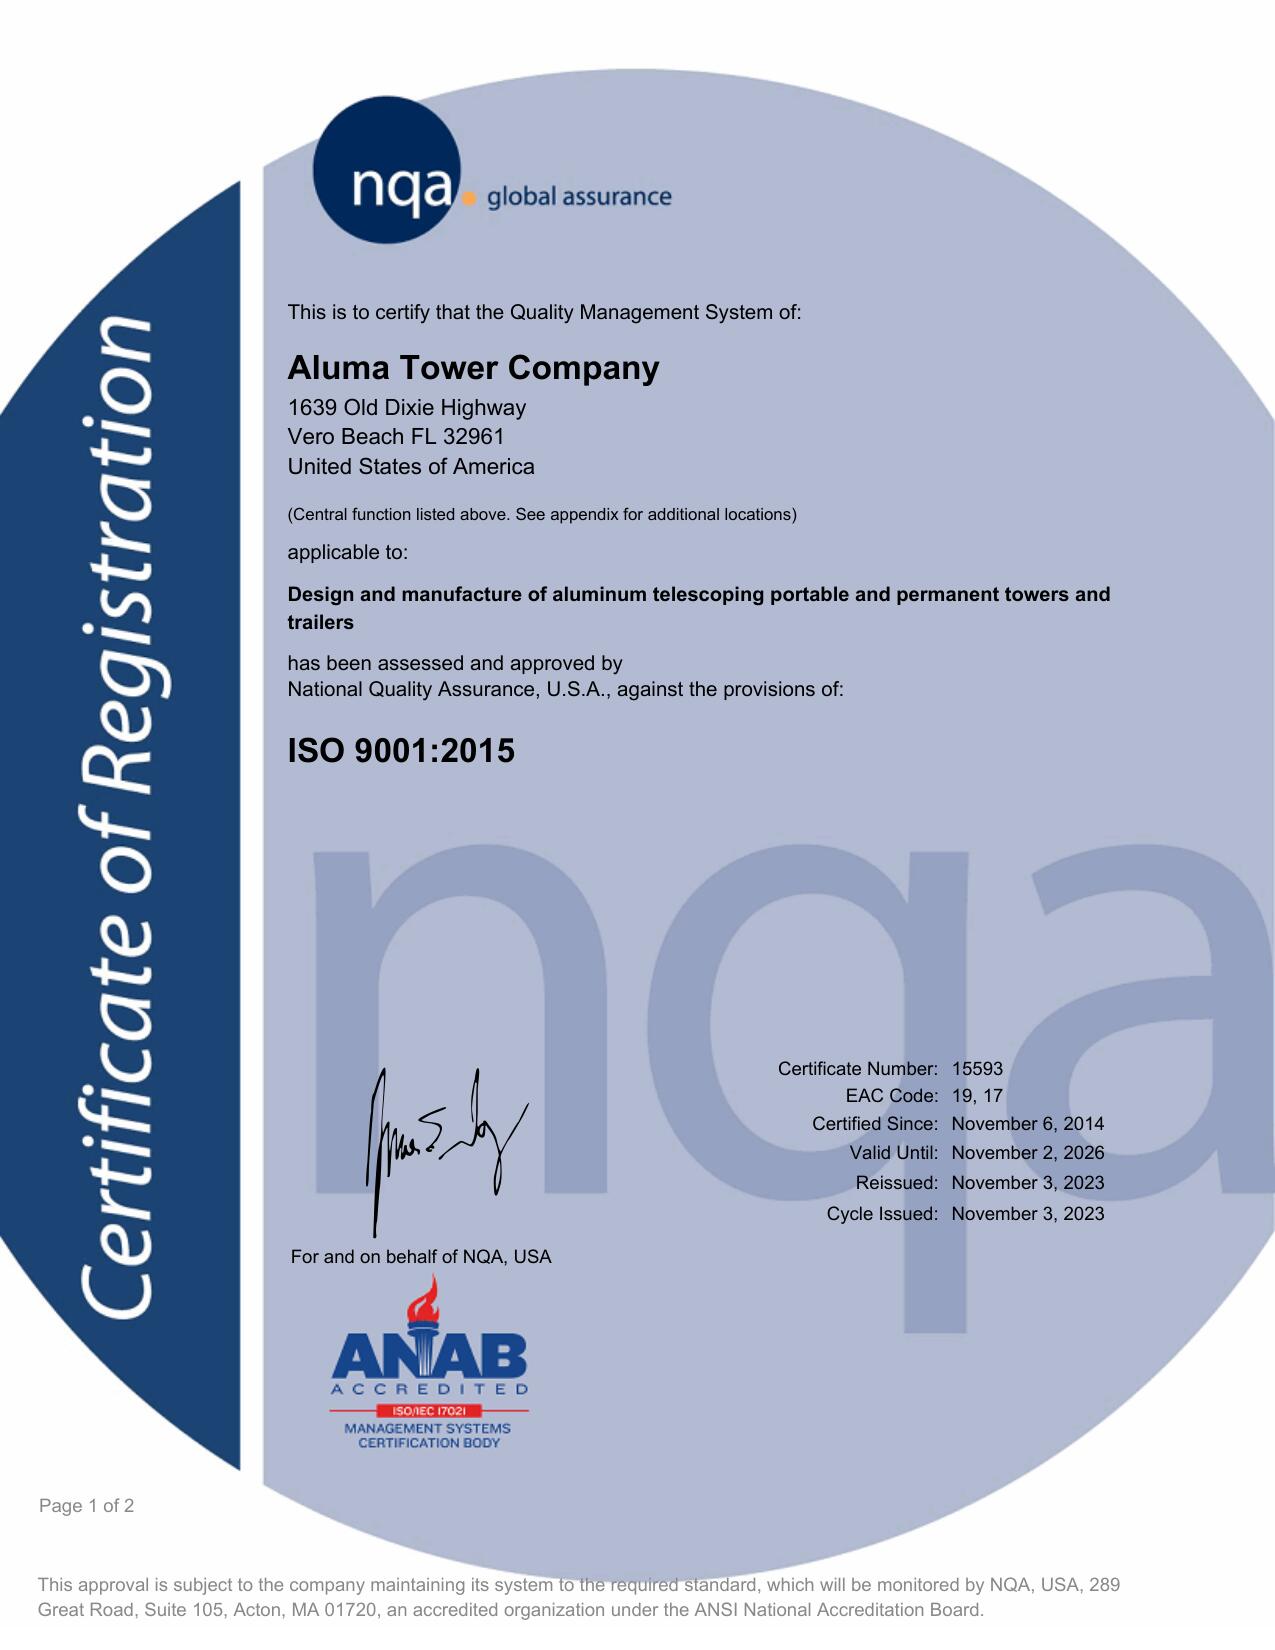 nqa global assurance certificate page 1